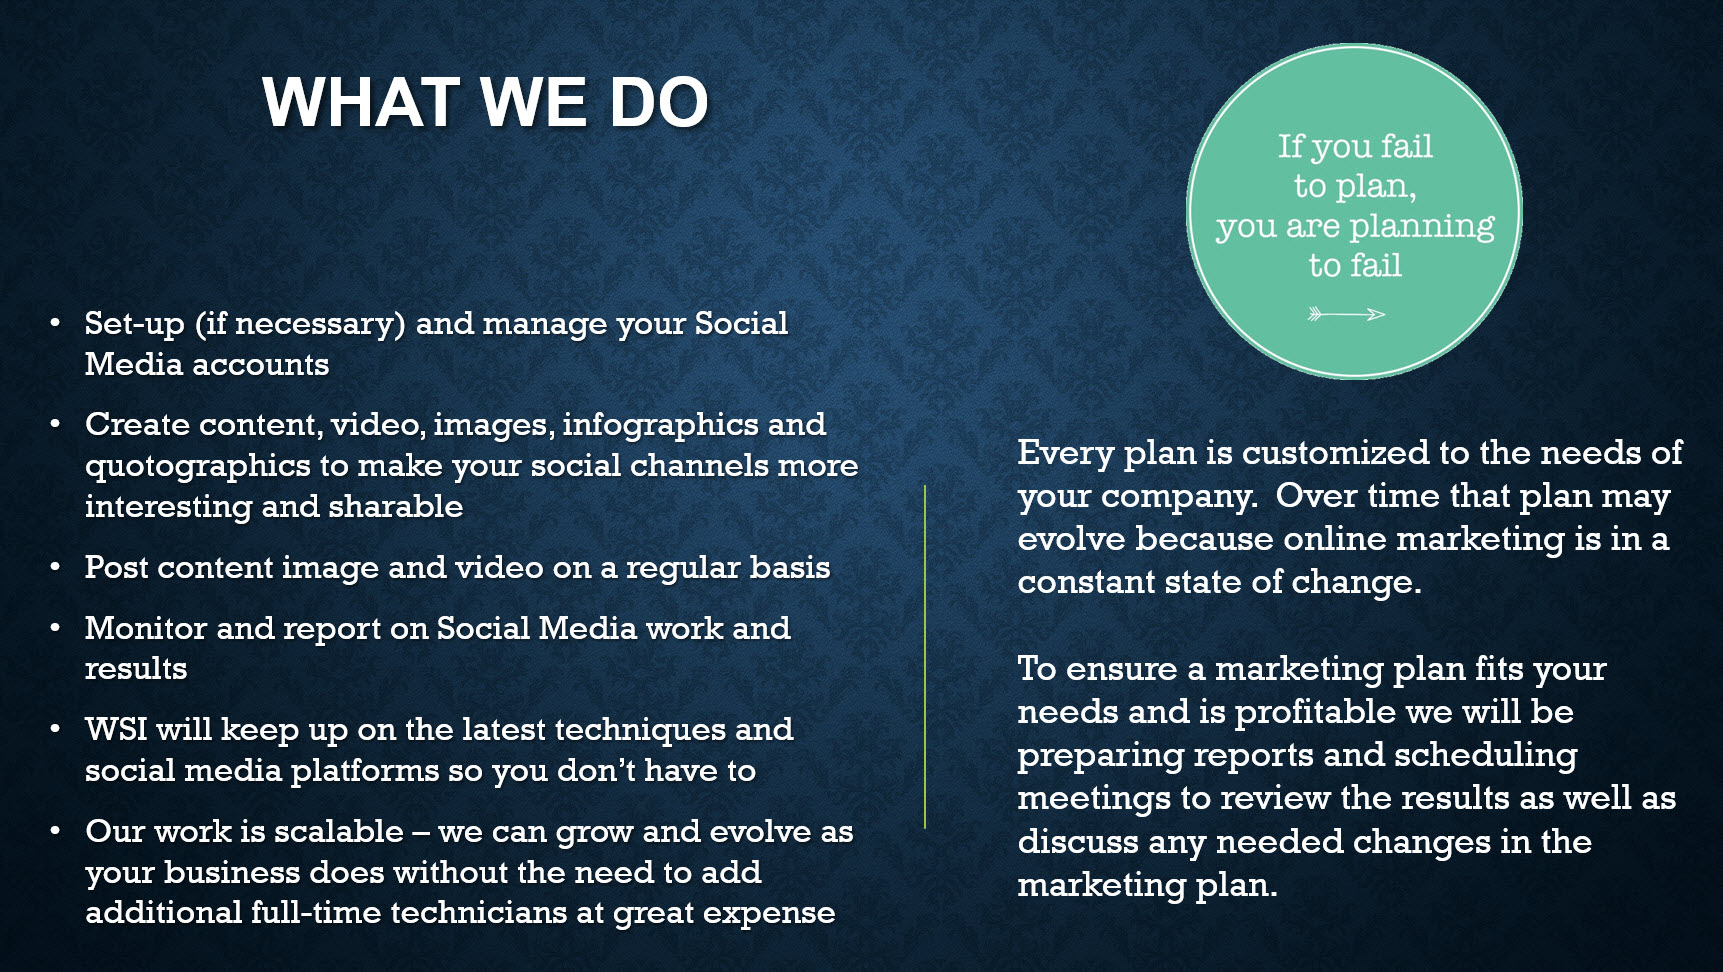 How WSI can help with social media